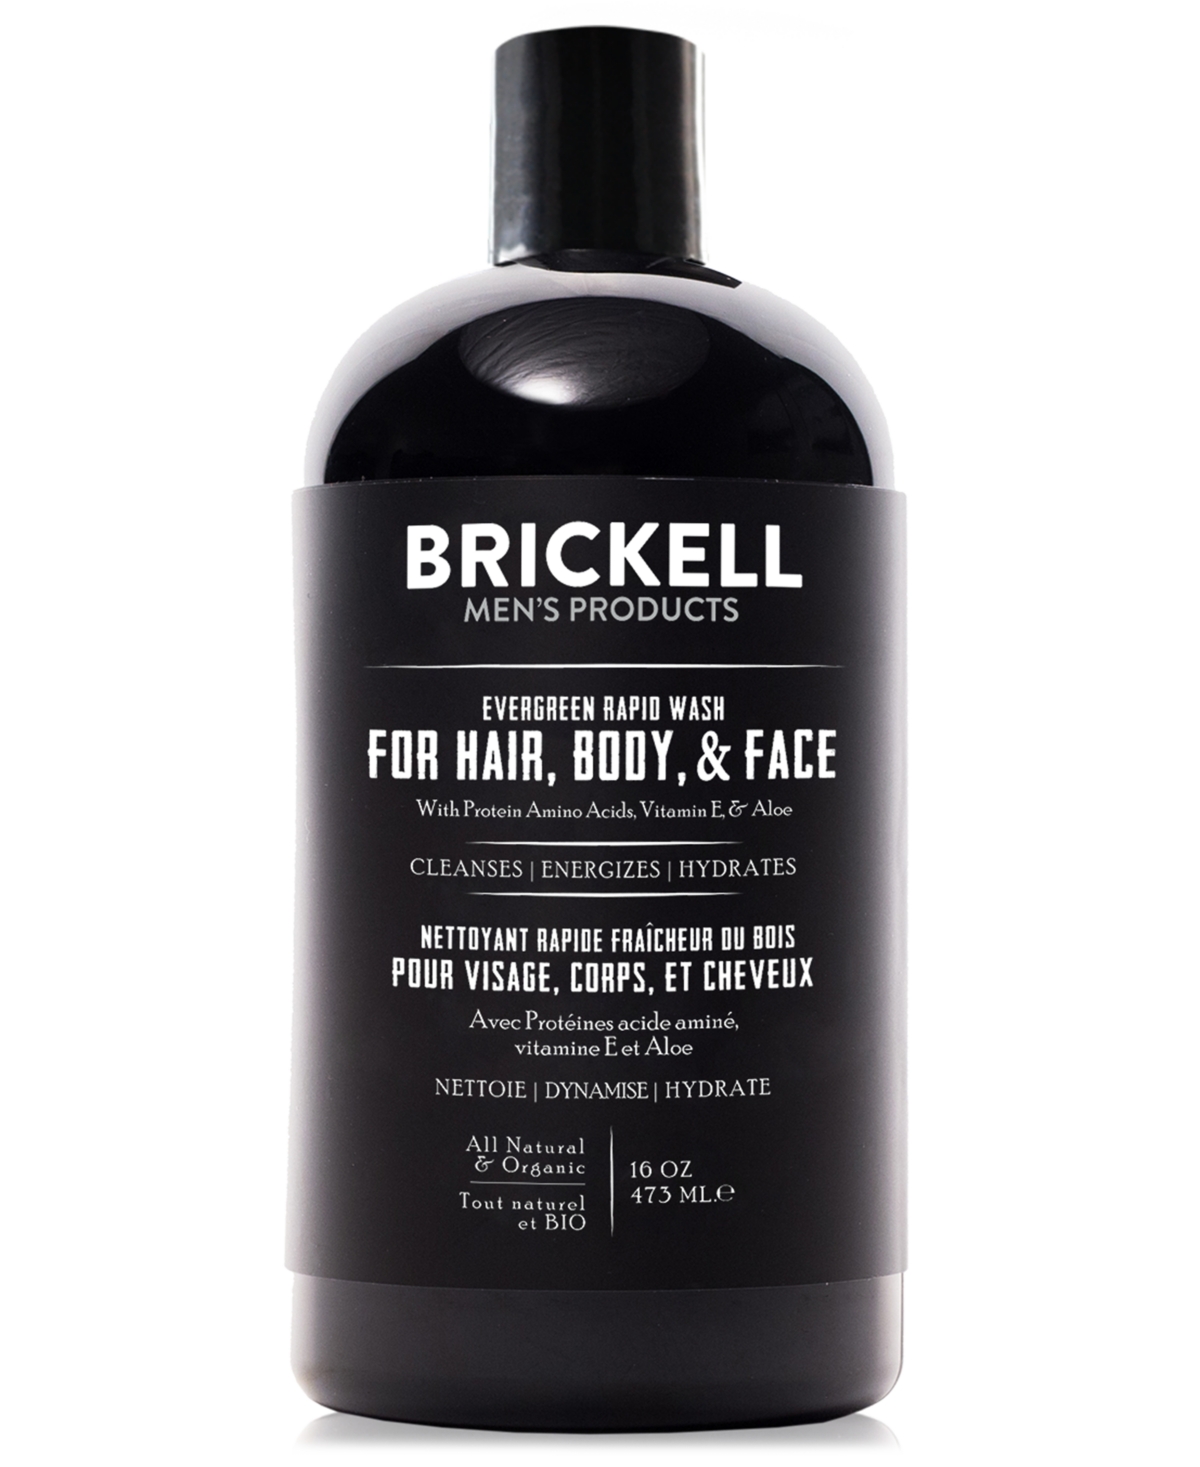 Brickell Men's Products Evergreen Rapid Wash for Hair, Body & Face, 16 oz